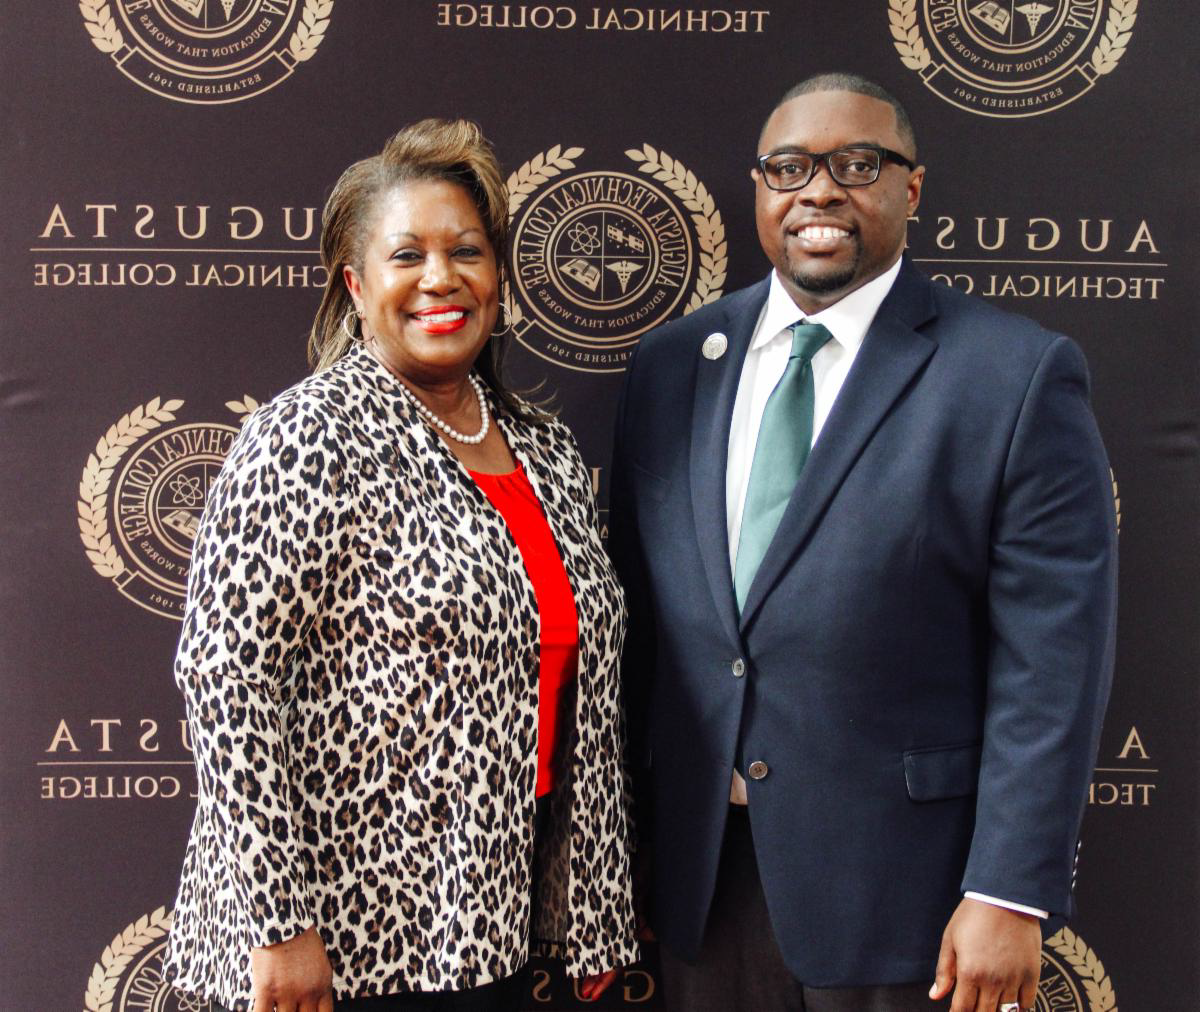 Photo: Smiling African American male wearing black glasses, 蓝色的套件, 浅蓝色/青色领带, 白领衬衫, with silver lapel pin standing next to a smiling African American female wearing red shirt, 珍珠项链, 豹纹开衫, posing for a photo in front of a black background with the 奥古斯塔 Tech seal.